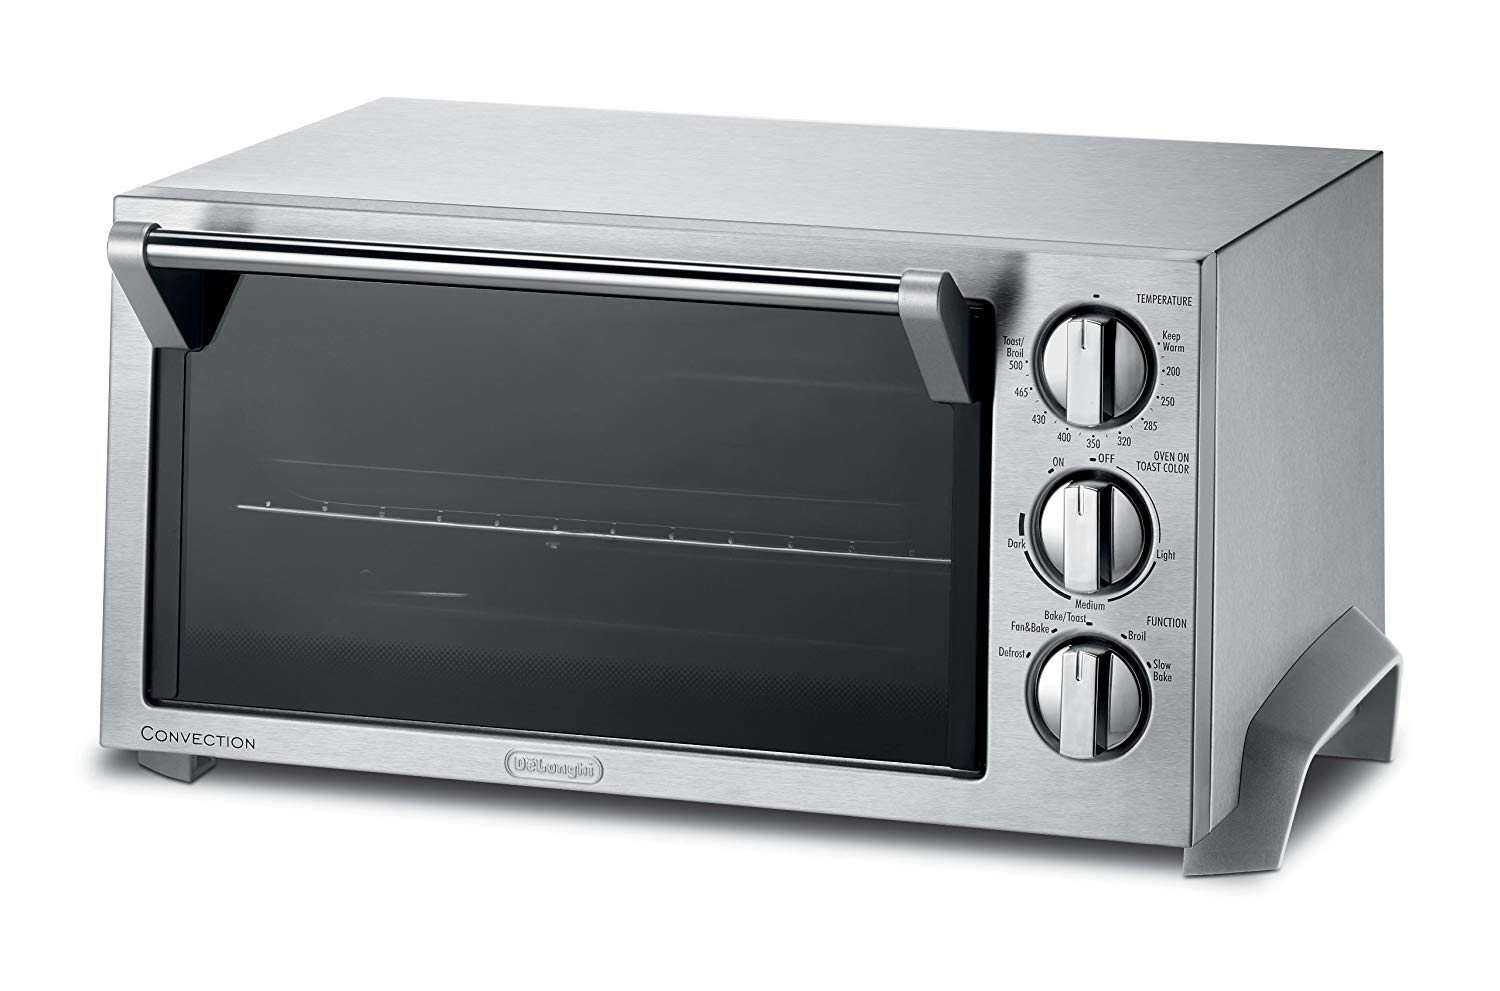 An image related to DeLonghi EO1270 Silver Convection Large Six Slice Toaster Oven